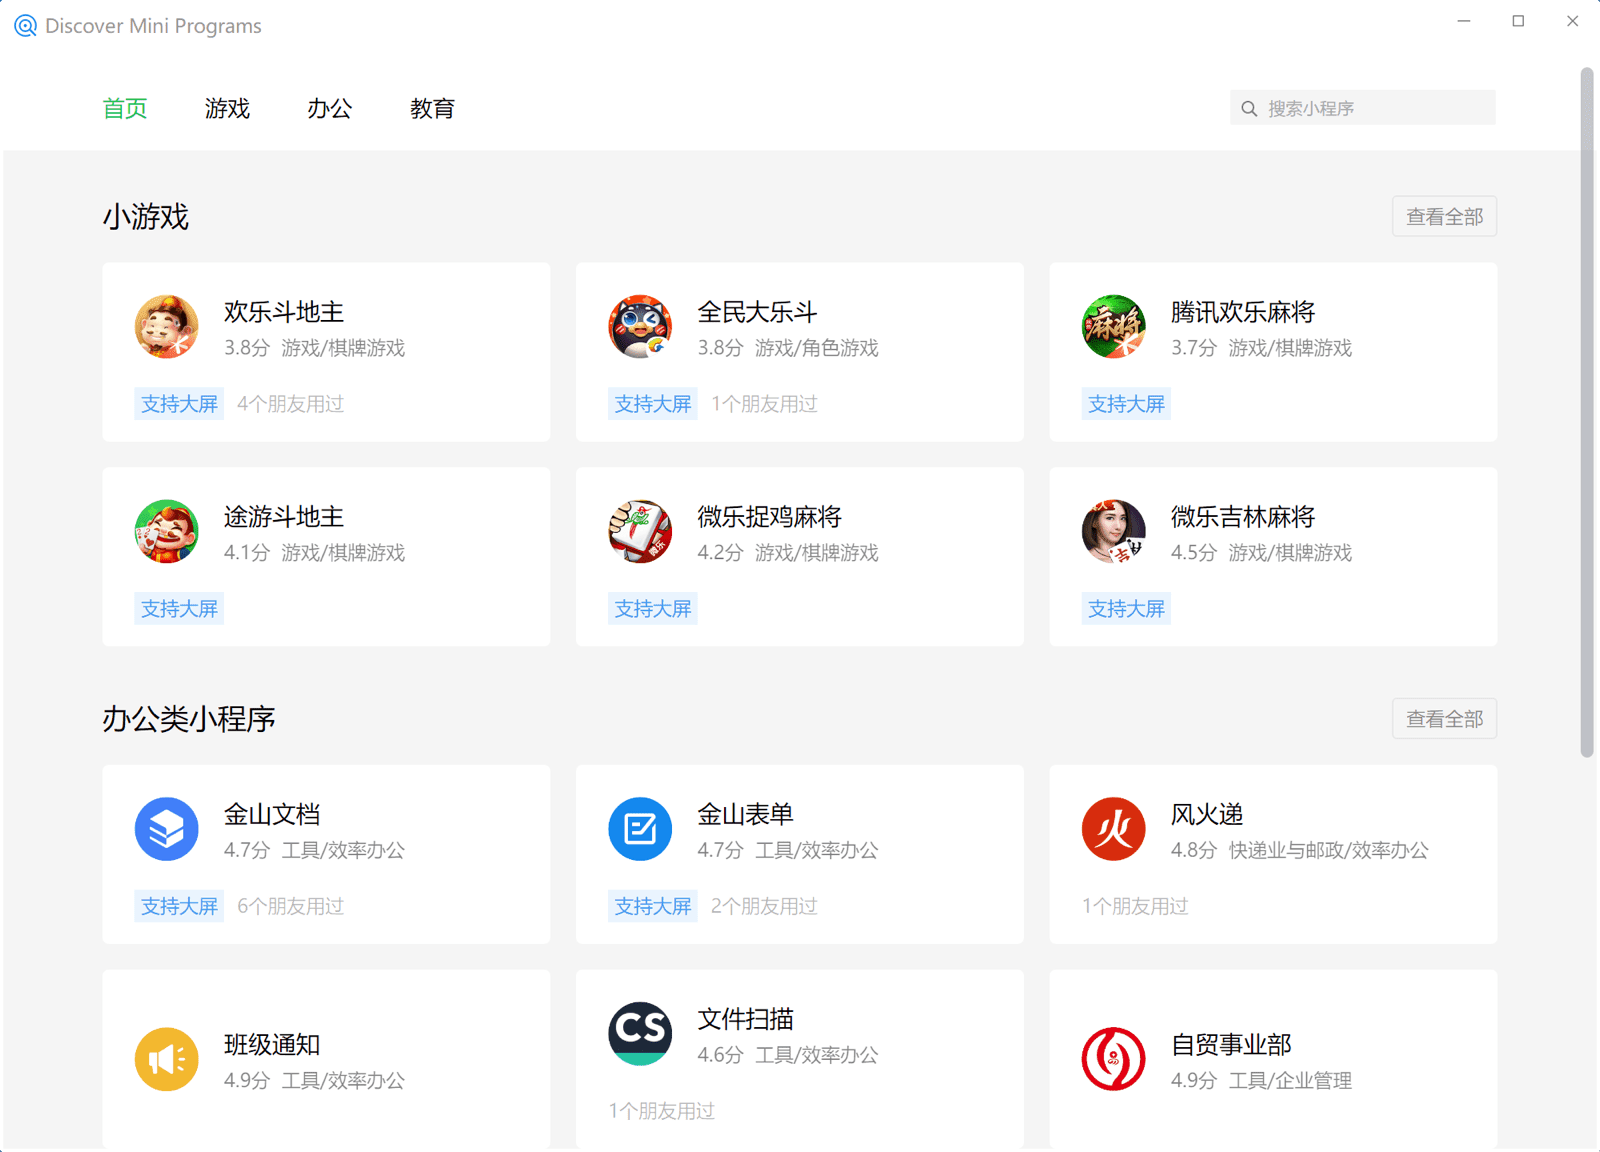 The mini app search in the WeChat Windows client showing mini apps listed in various categories like games, business, education, etc.